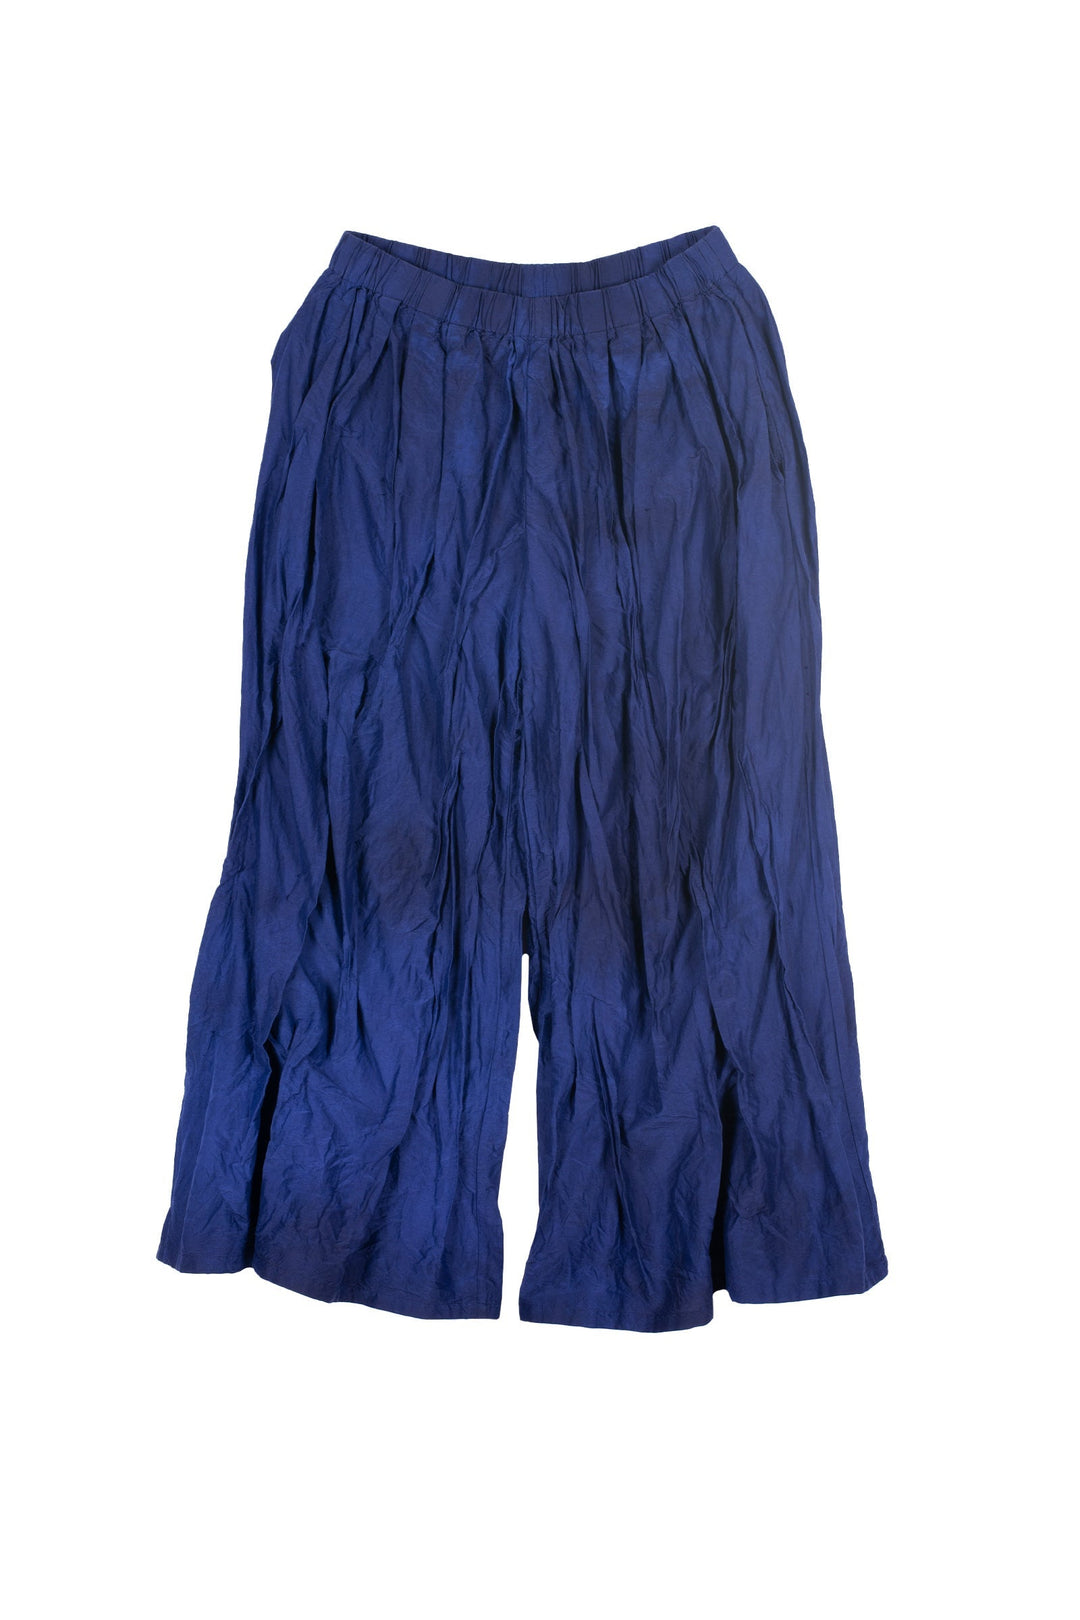 DYED COTTON SILK HEAVY VOILE WAVY TUCKED PANTS - dh1635-blu -